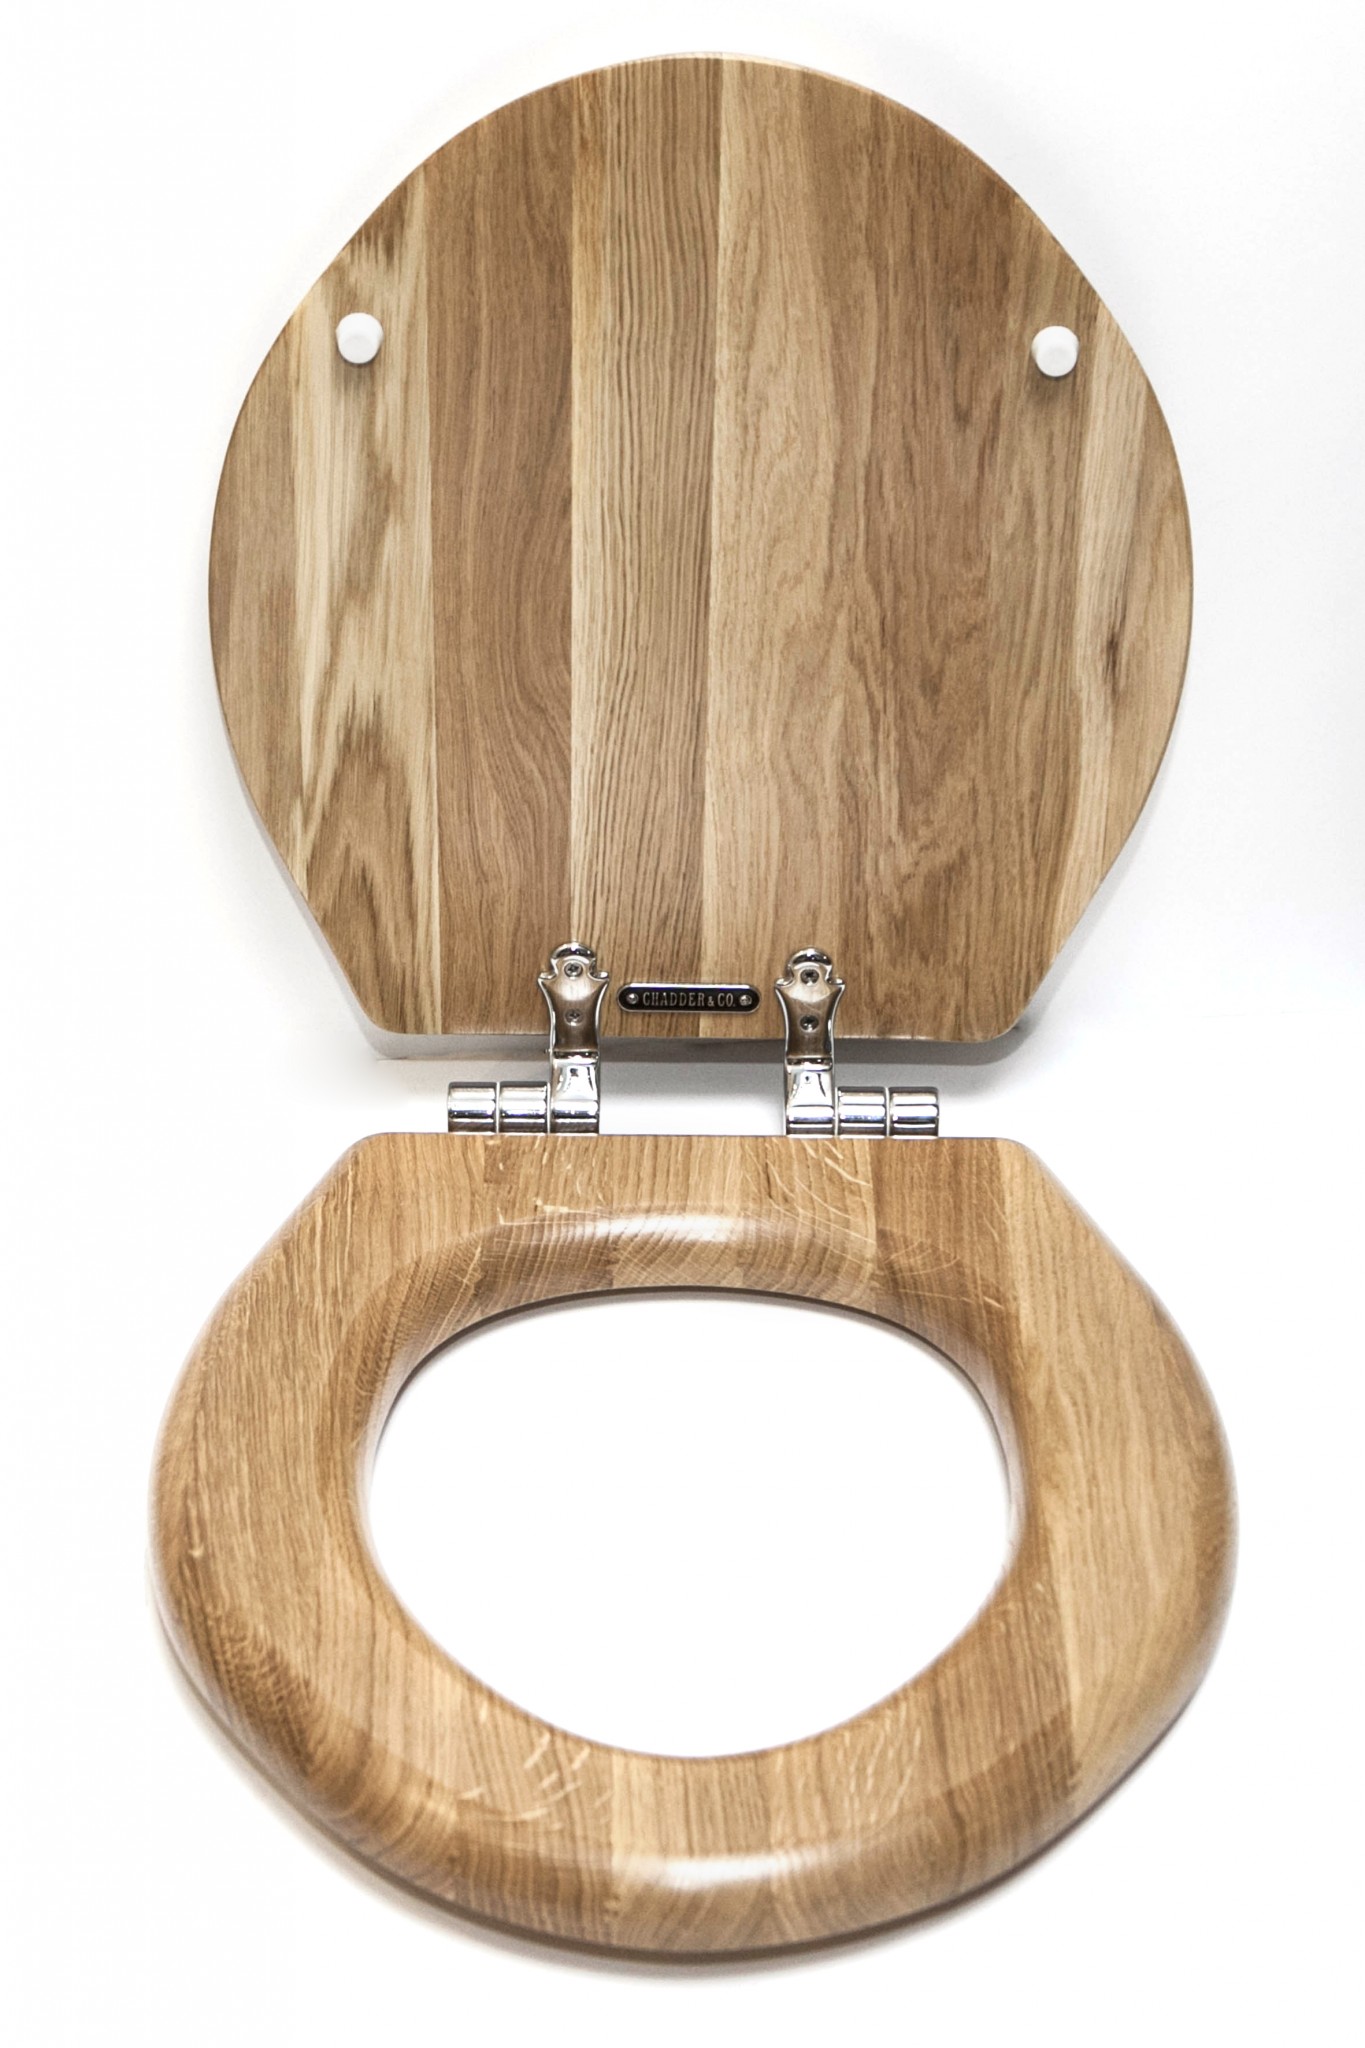 Wooden Toilet Seats | Chadder & Co.